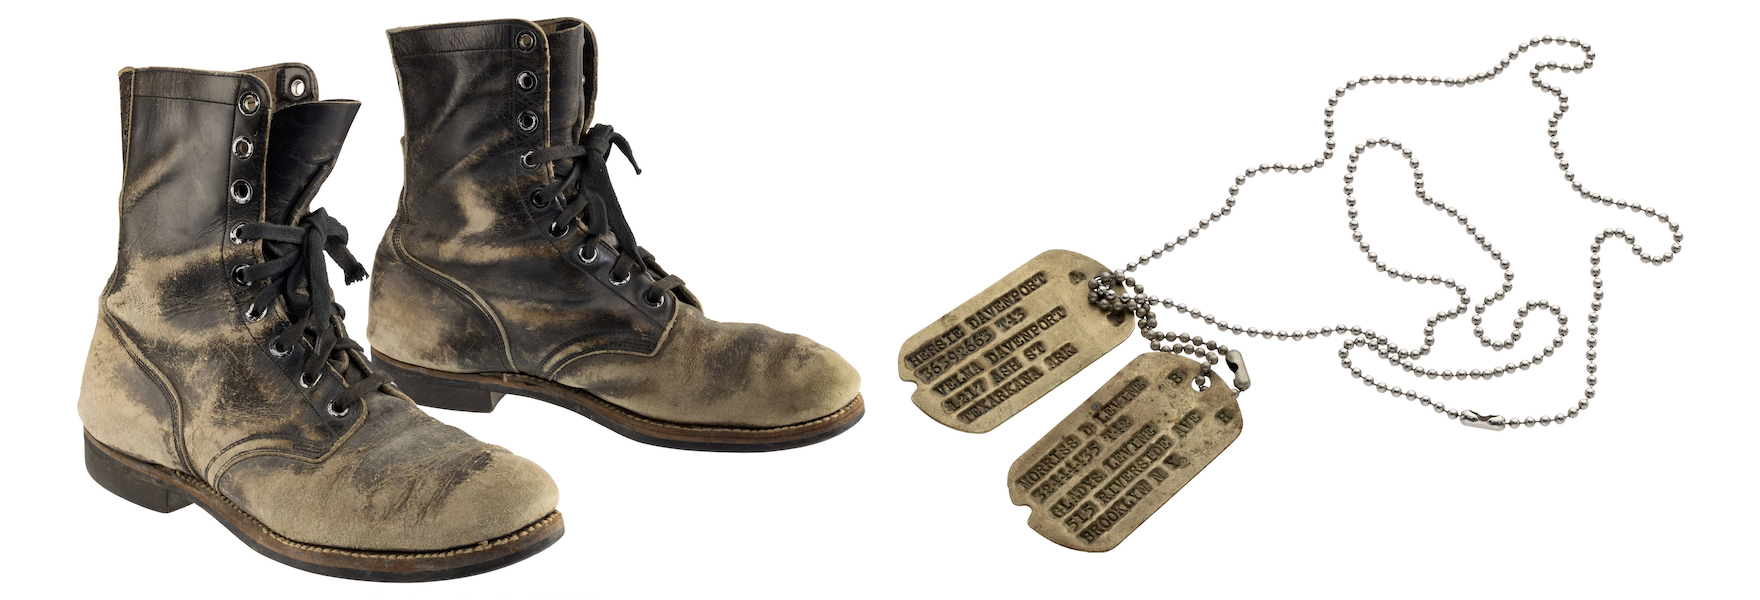 The combat boots and dog tags Alan Alda wore when portraying Hawkeye Pierce on the legendary war sitcom ‘M-A-S-H’ will be auctioned July 28 to raise money for Alan Alda Center for Communicating Science at Stony Brook University in New York. Images courtesy of Heritage Auctions